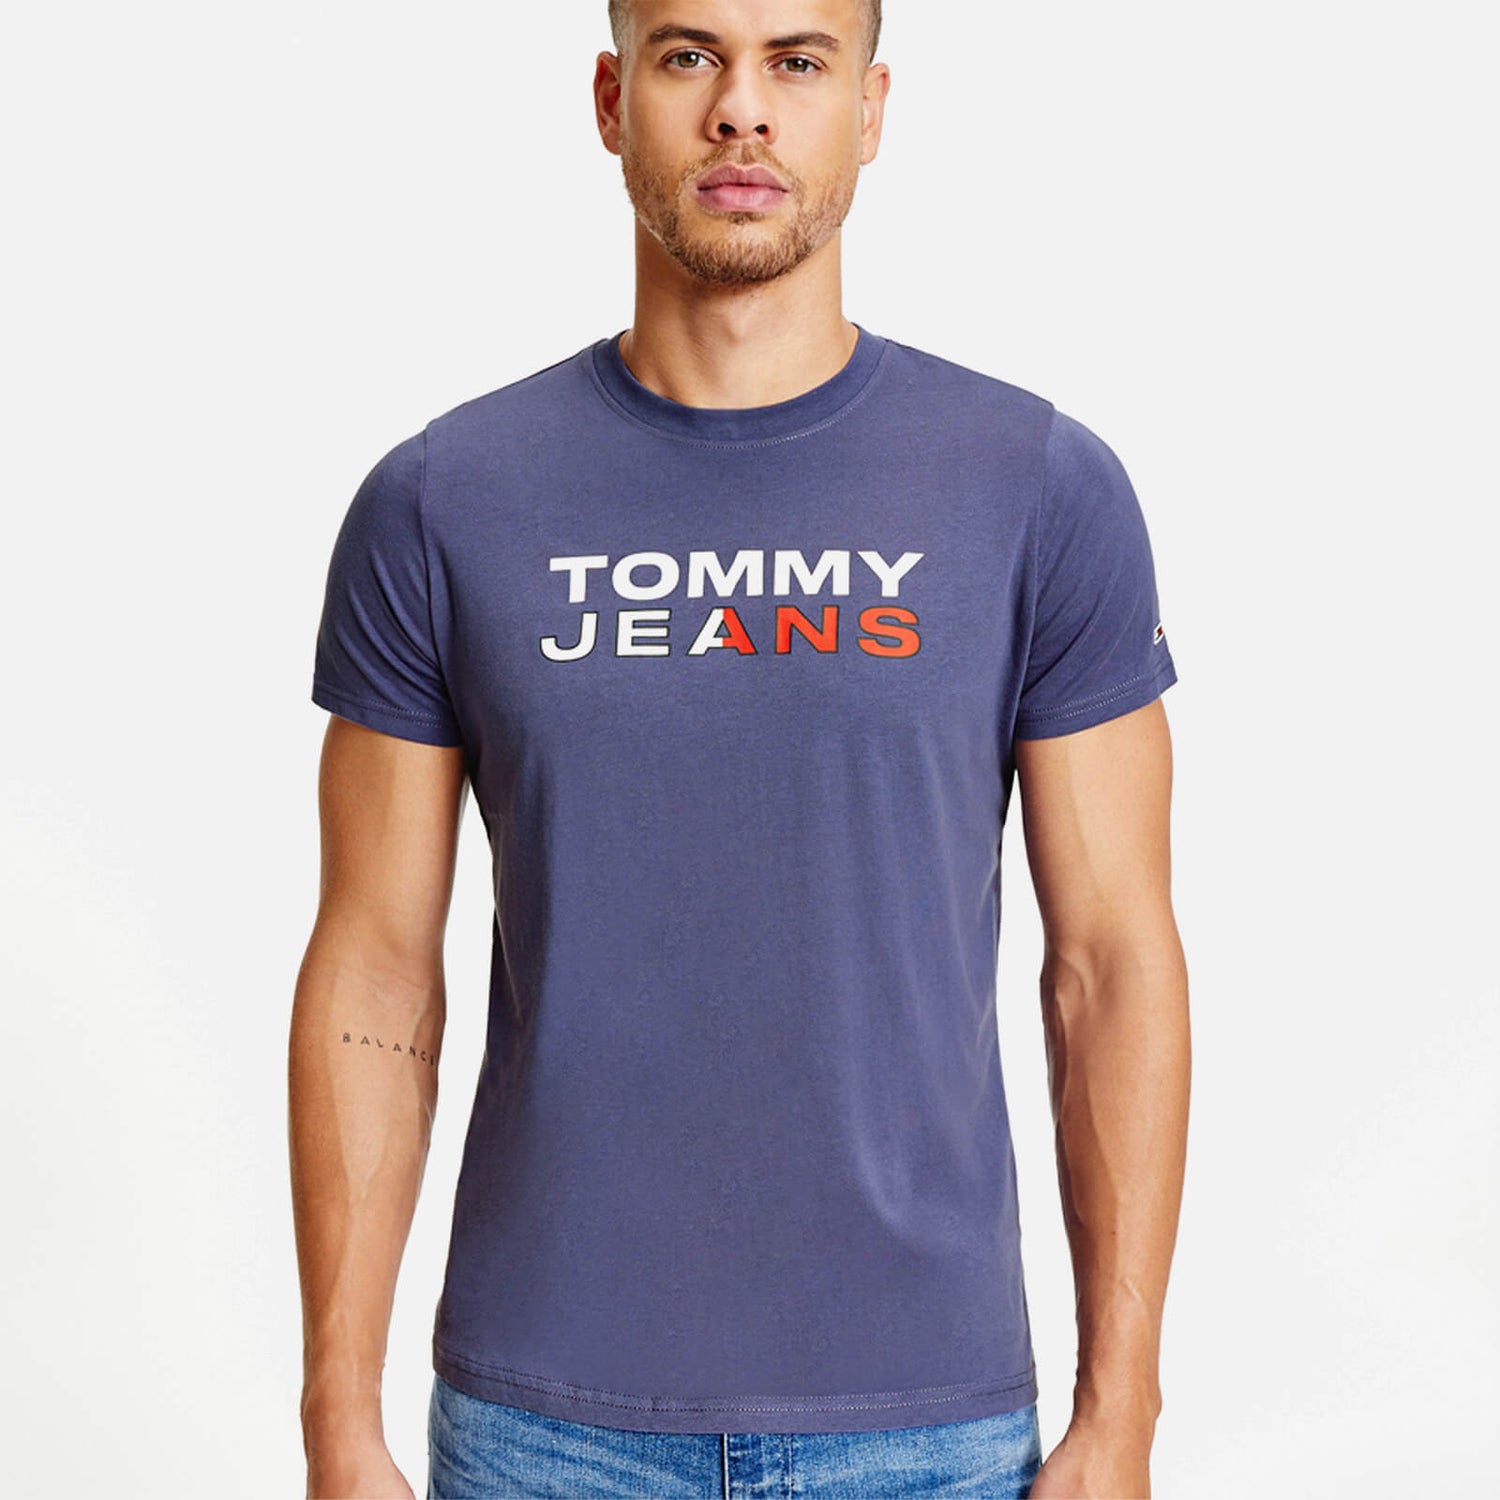 Tommy Jeans Men's Essential Graphic T-Shirt - Dark Aster